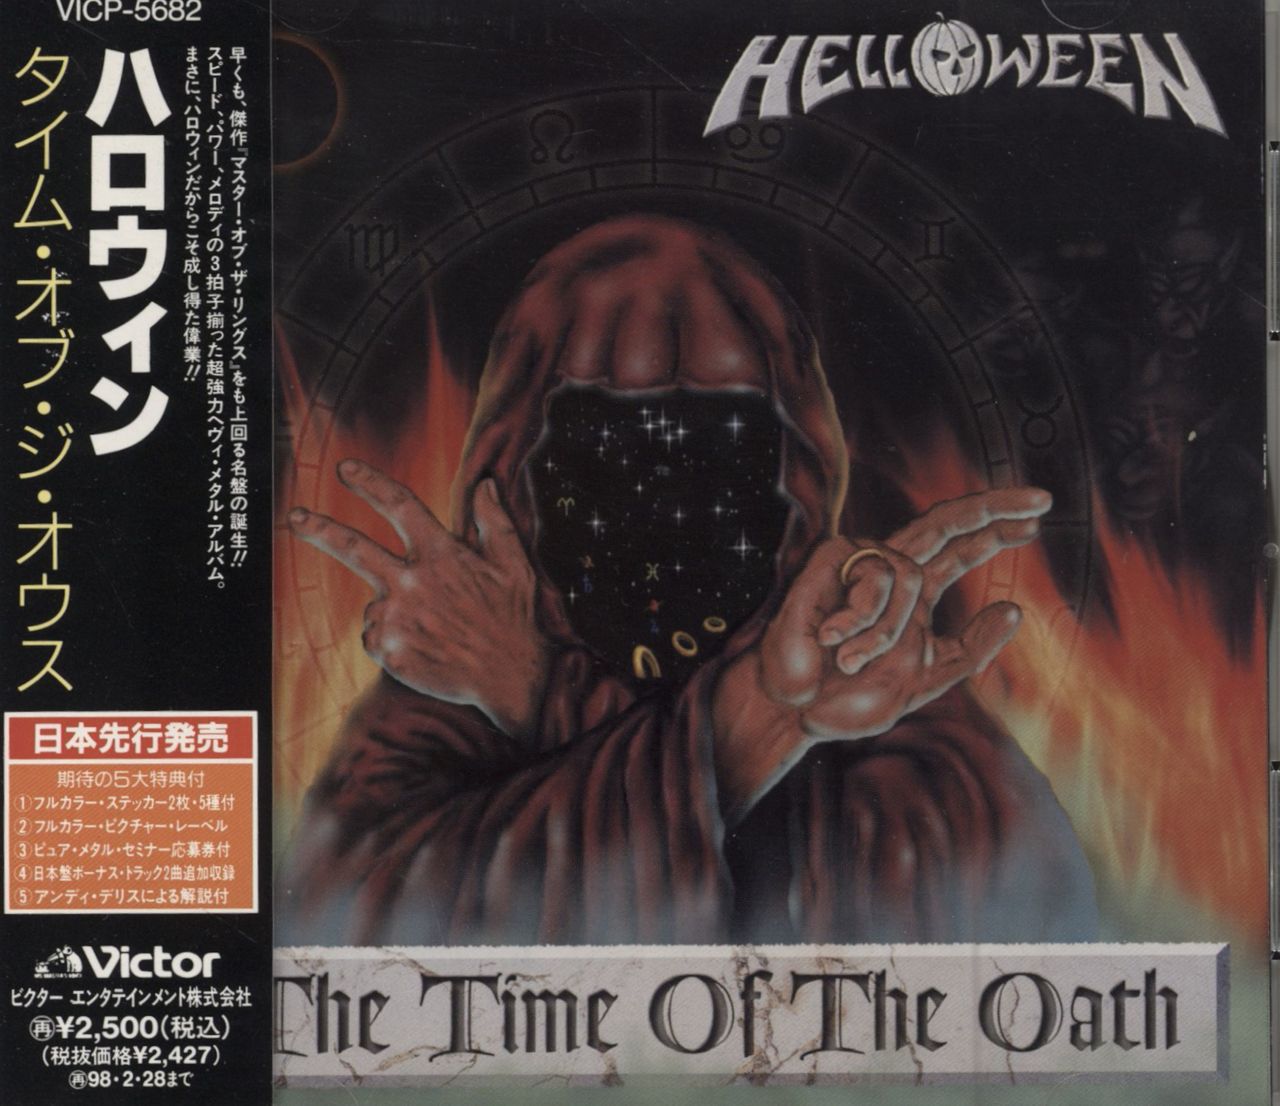 Helloween The Time Of The Oath Japanese Promo CD album (CDLP) VICP-5682